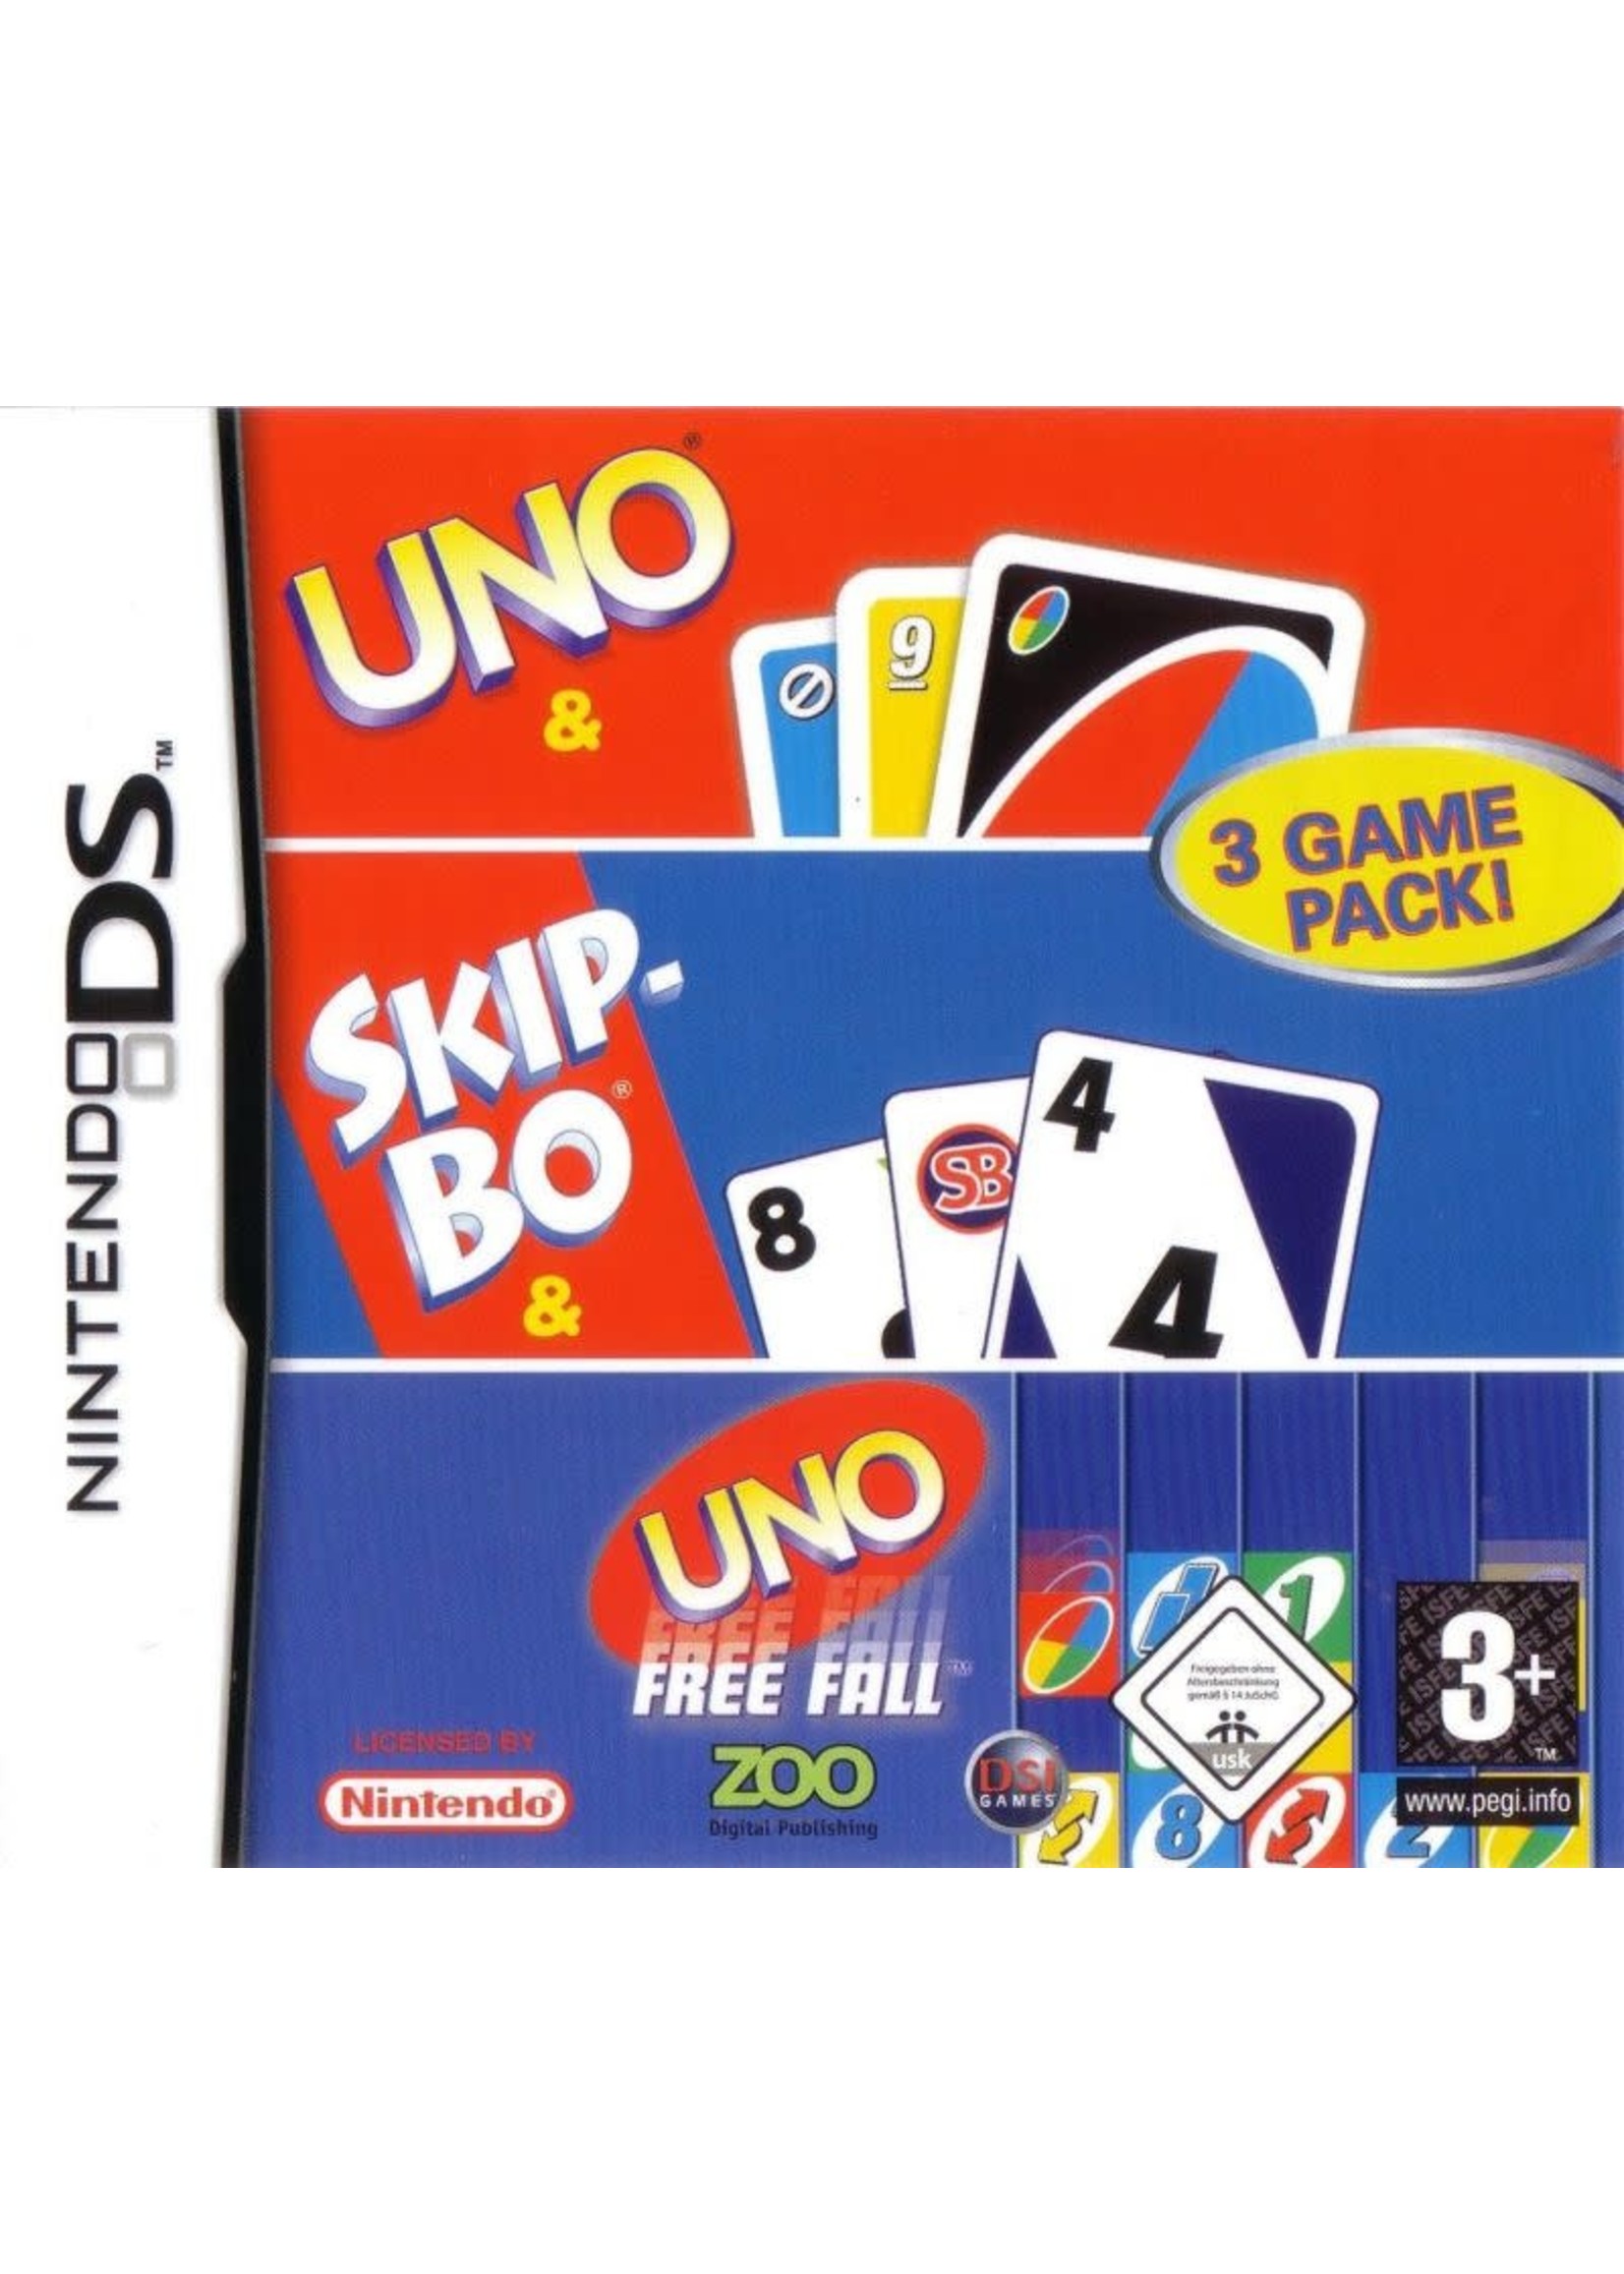 Nintendo DS Uno SkipBo Freefall - Cart Only